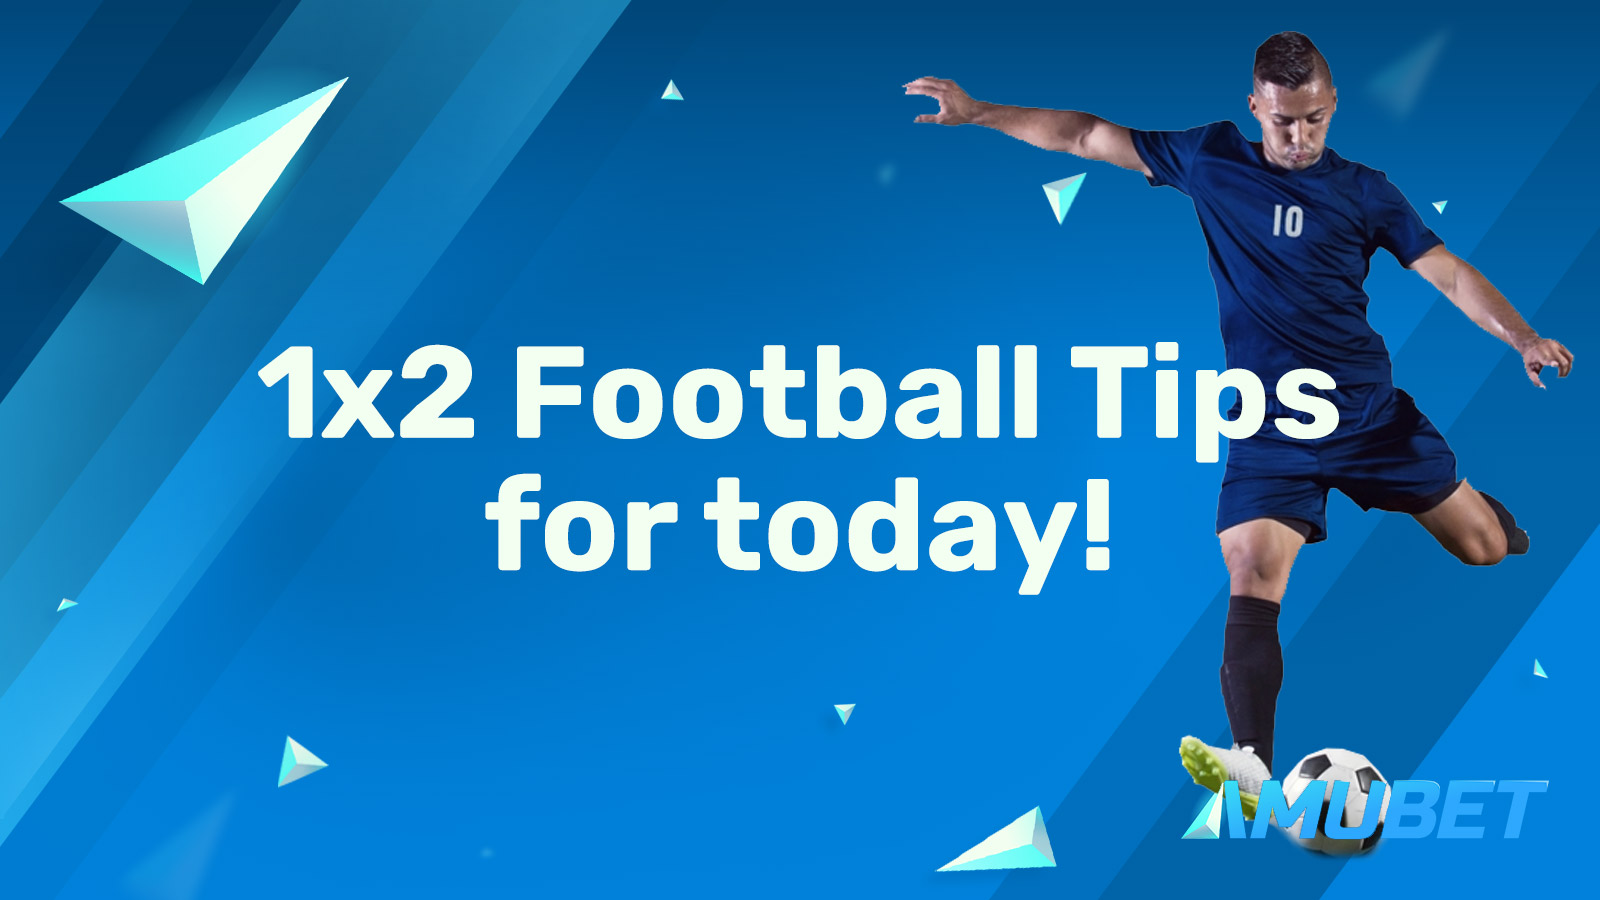 1x2 Football Tips for today!